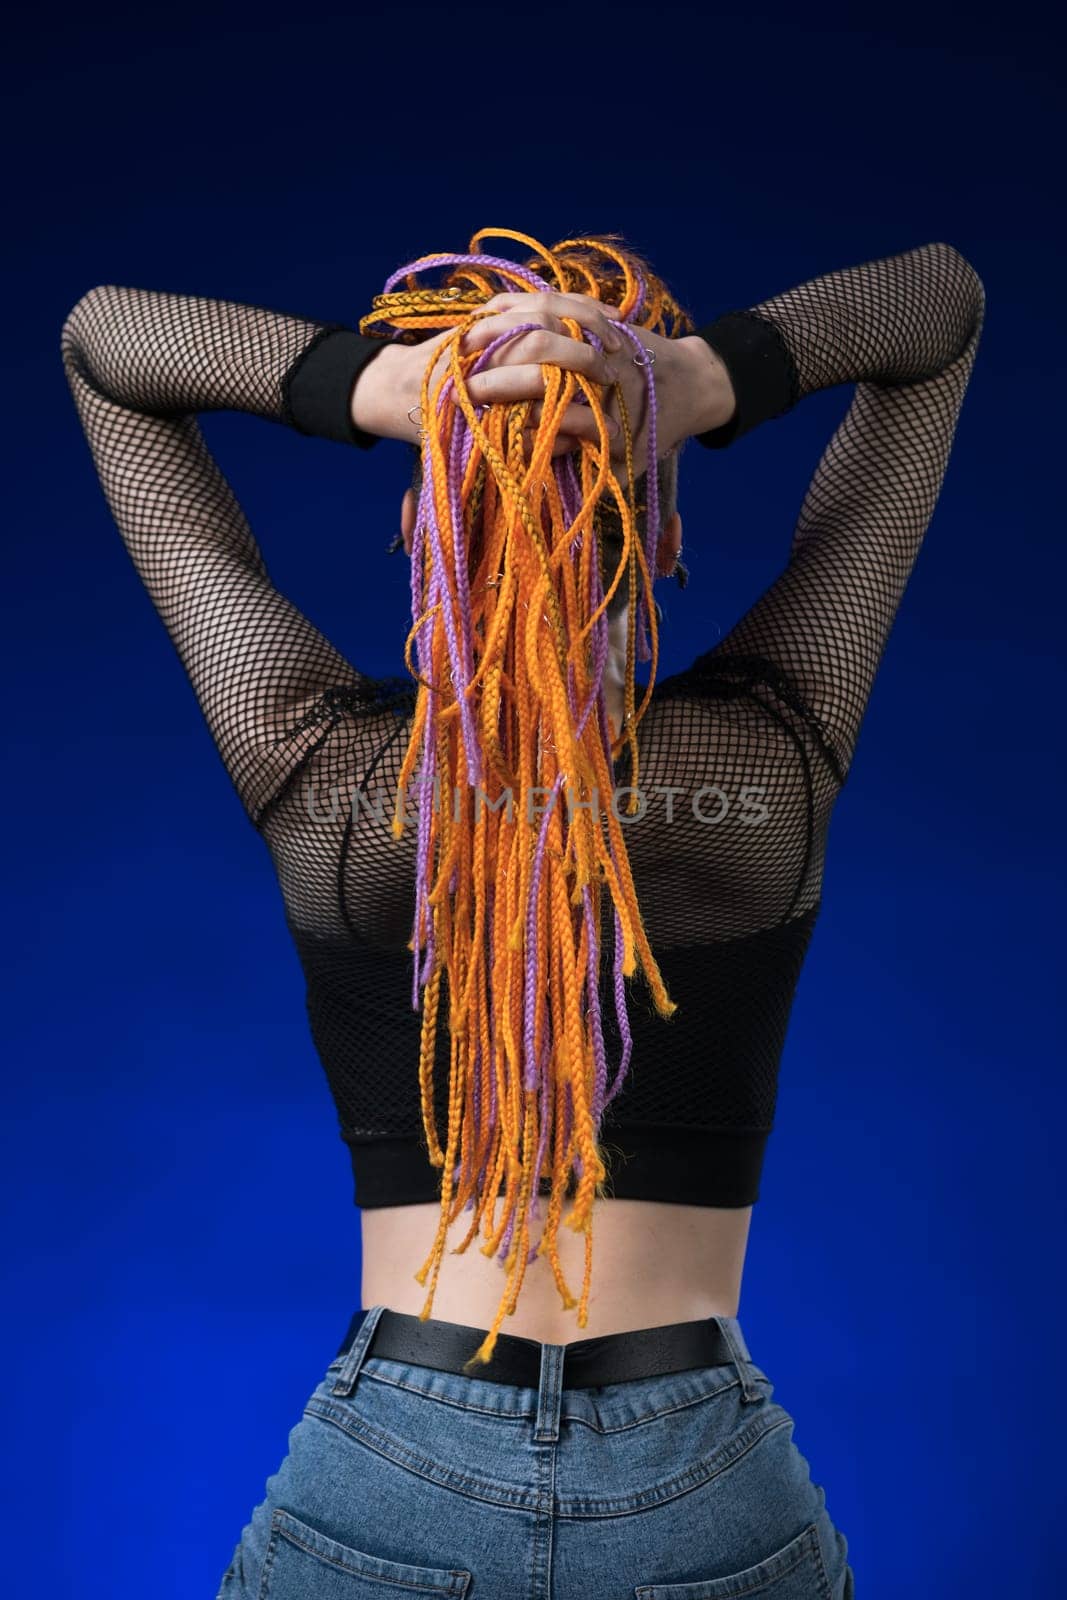 Rear view of unrecognizable woman with orange color without dangerous dreadlocks hairstyle. Studio shot on blue background. Part of photo series